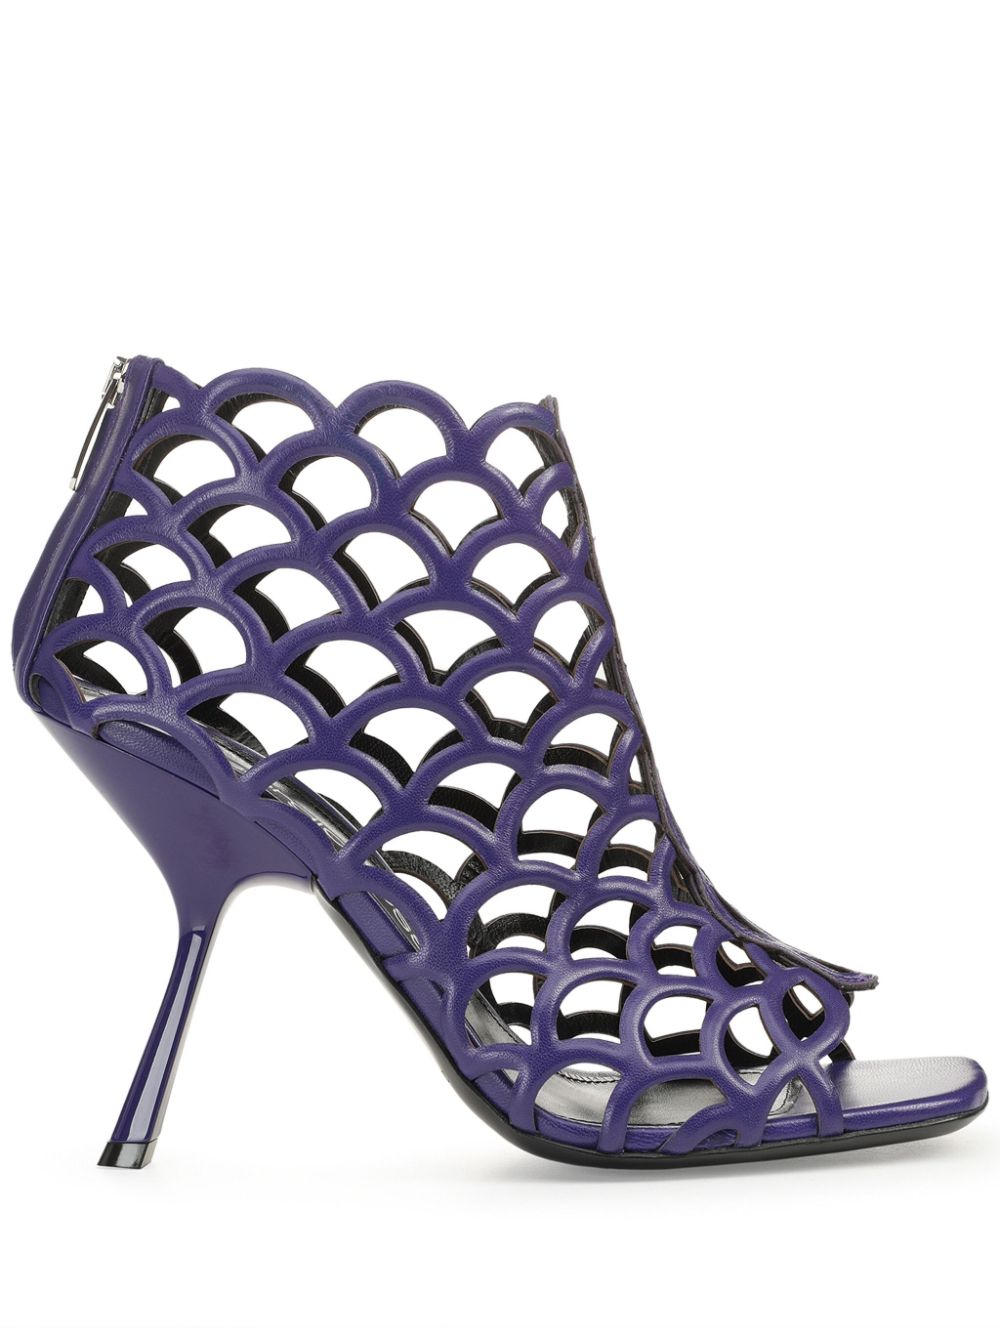 Sergio Rossi Mermaid Leather Cage Sandals In 蓝色